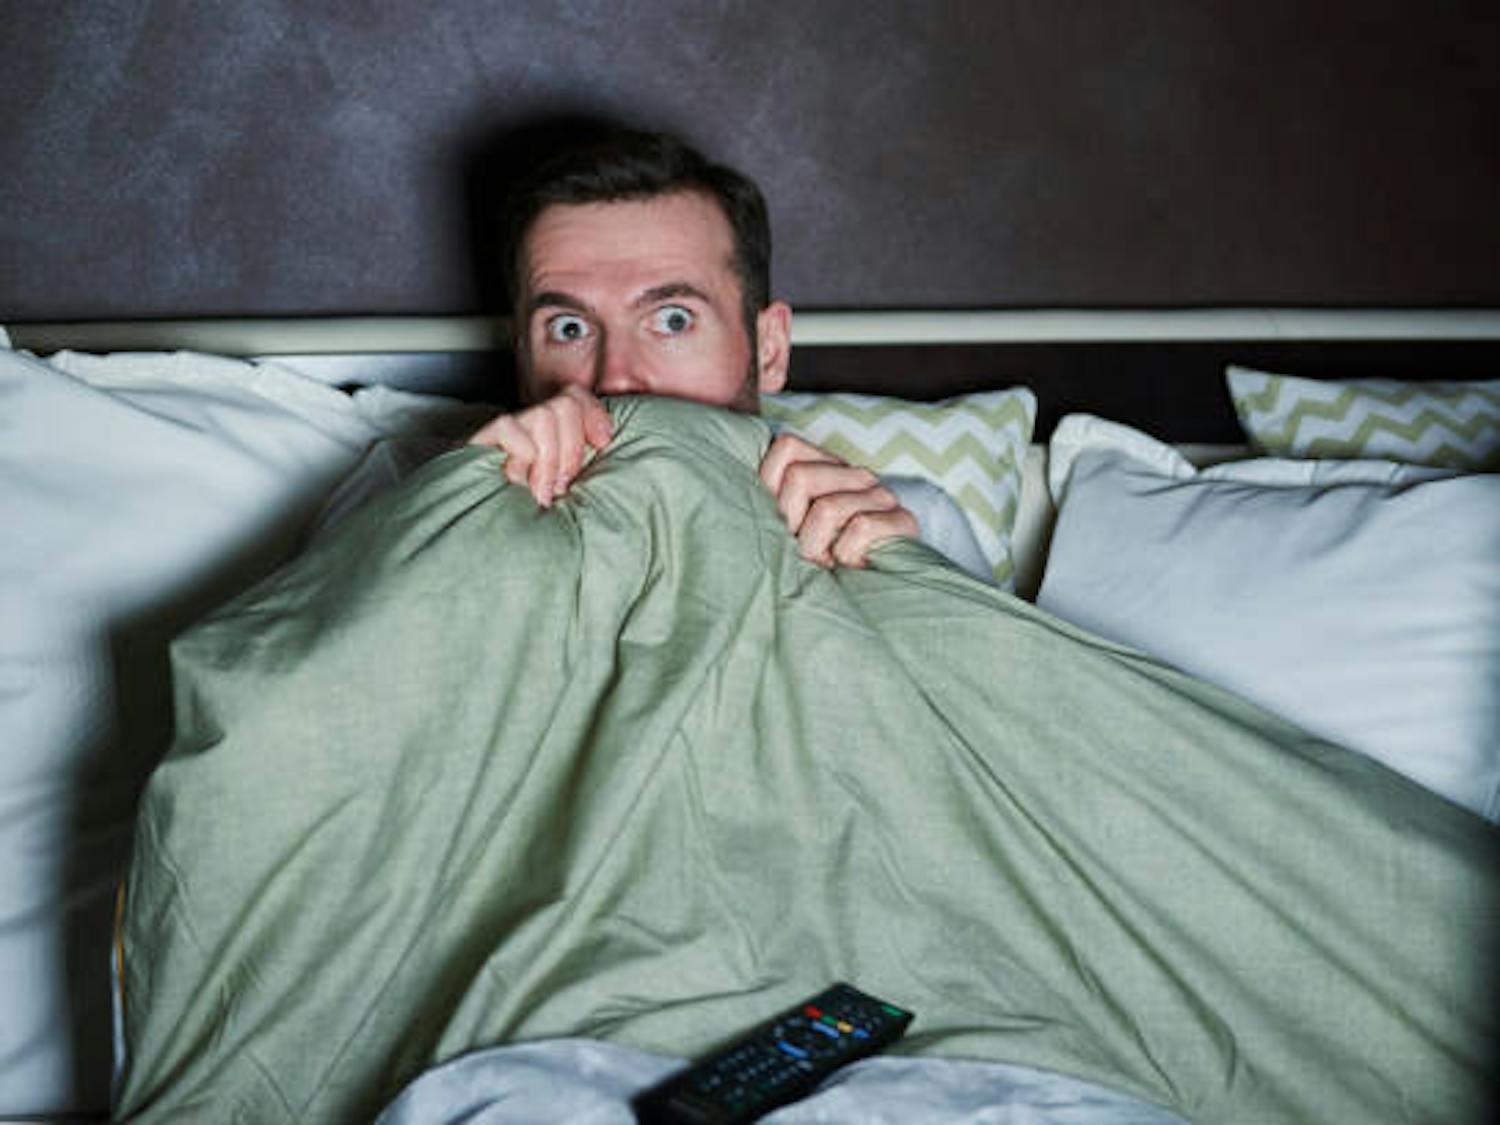 Scared person watching horror movies at night | Source: iStock